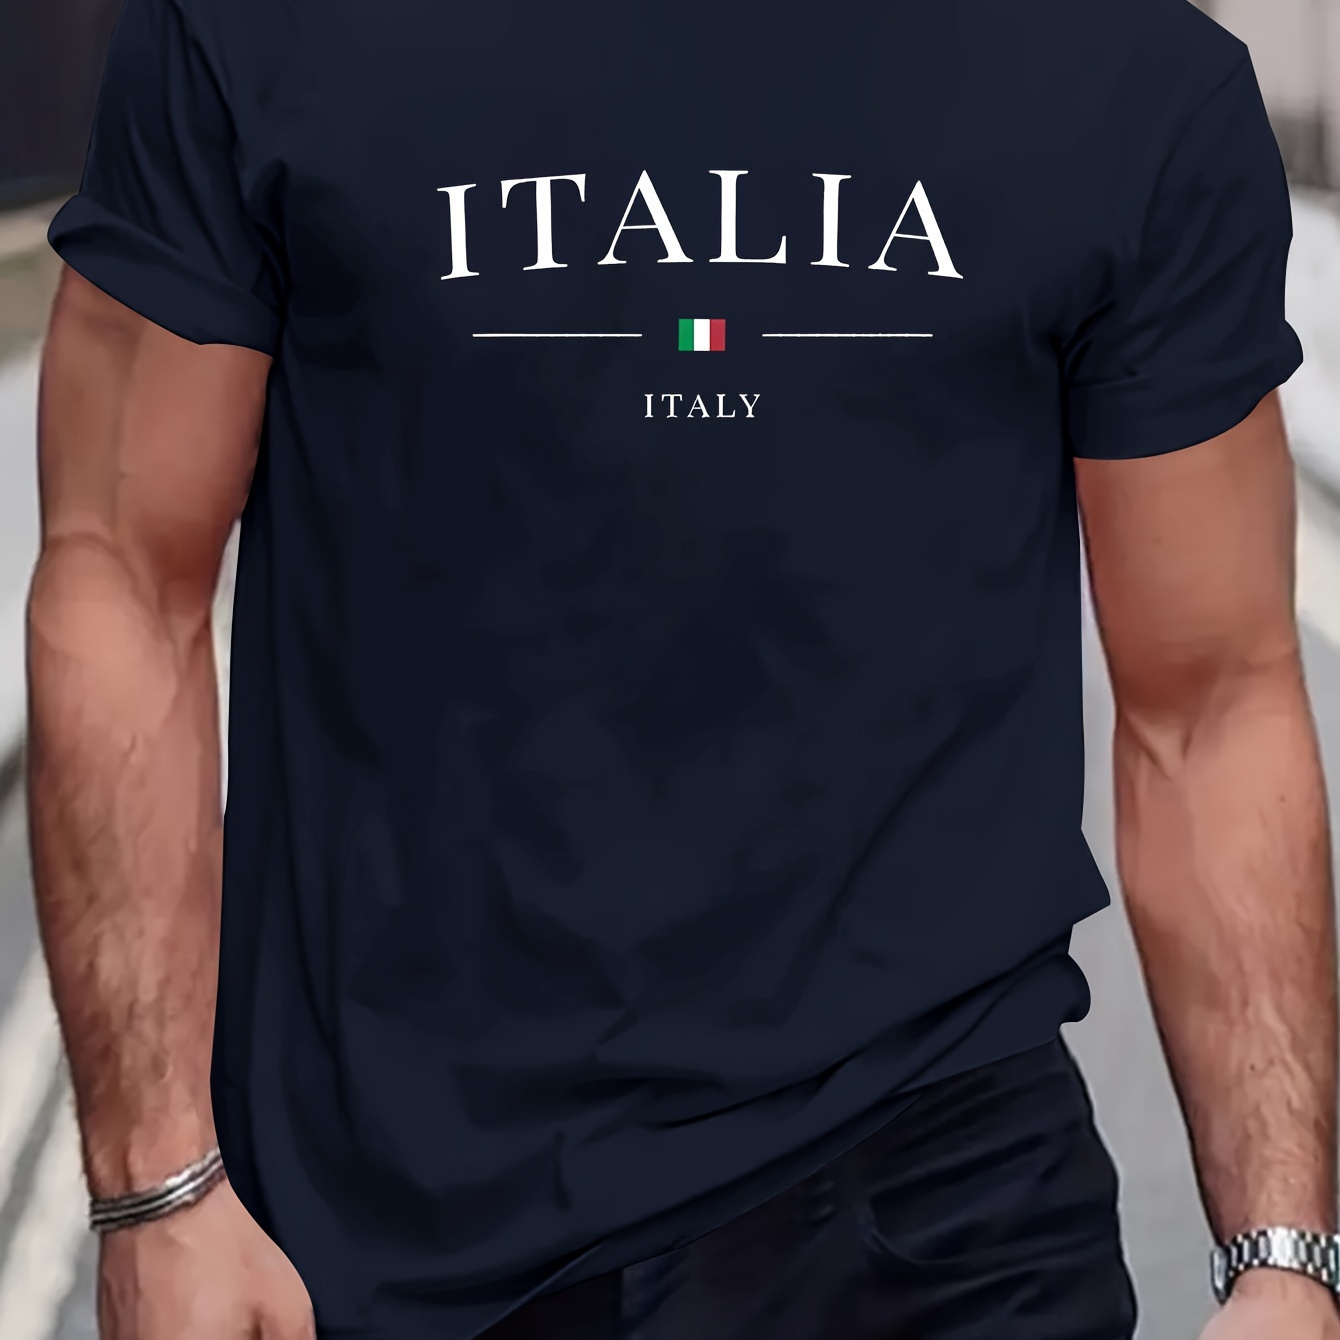 

Italia " Creative Print Casual Short-sleeved T-shirt For Men, Spring And Summer Trendy Top, Comfortable Round Neck Tee, Regular Fit, Versatile Fashion For Everyday Wear